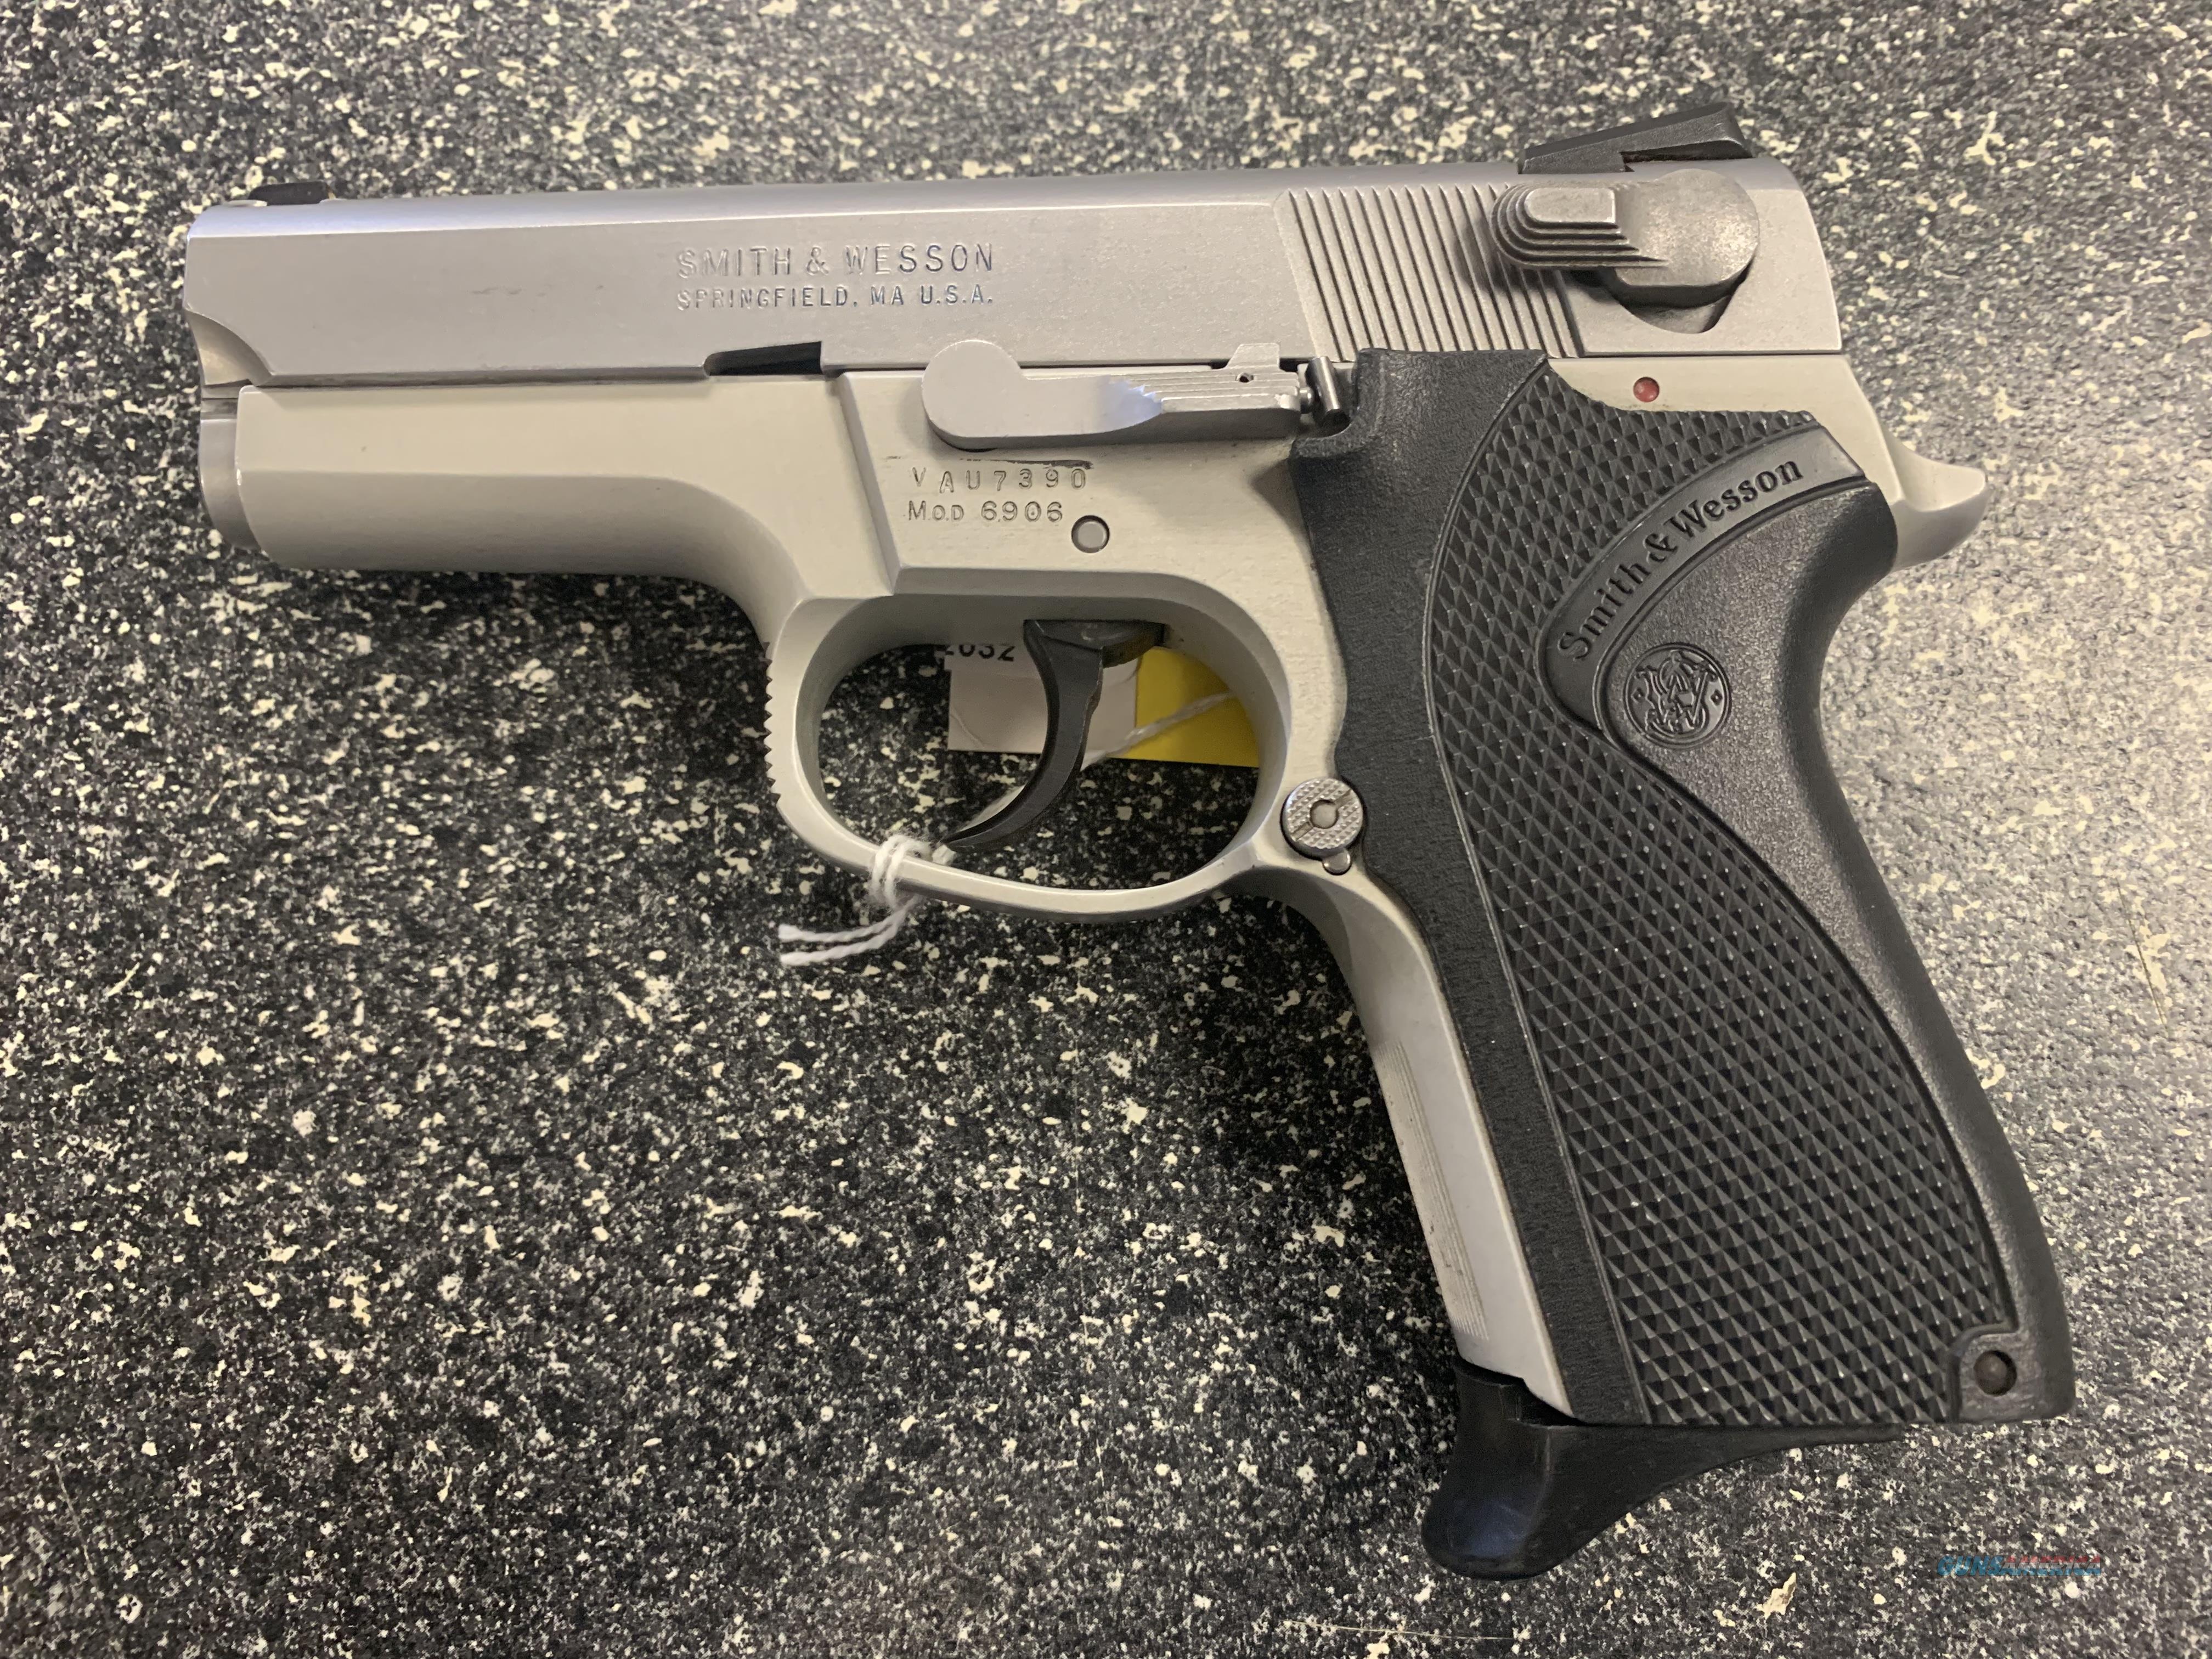 Smith And Wesson 6906 9mm Semi Auto Pistol For Sale